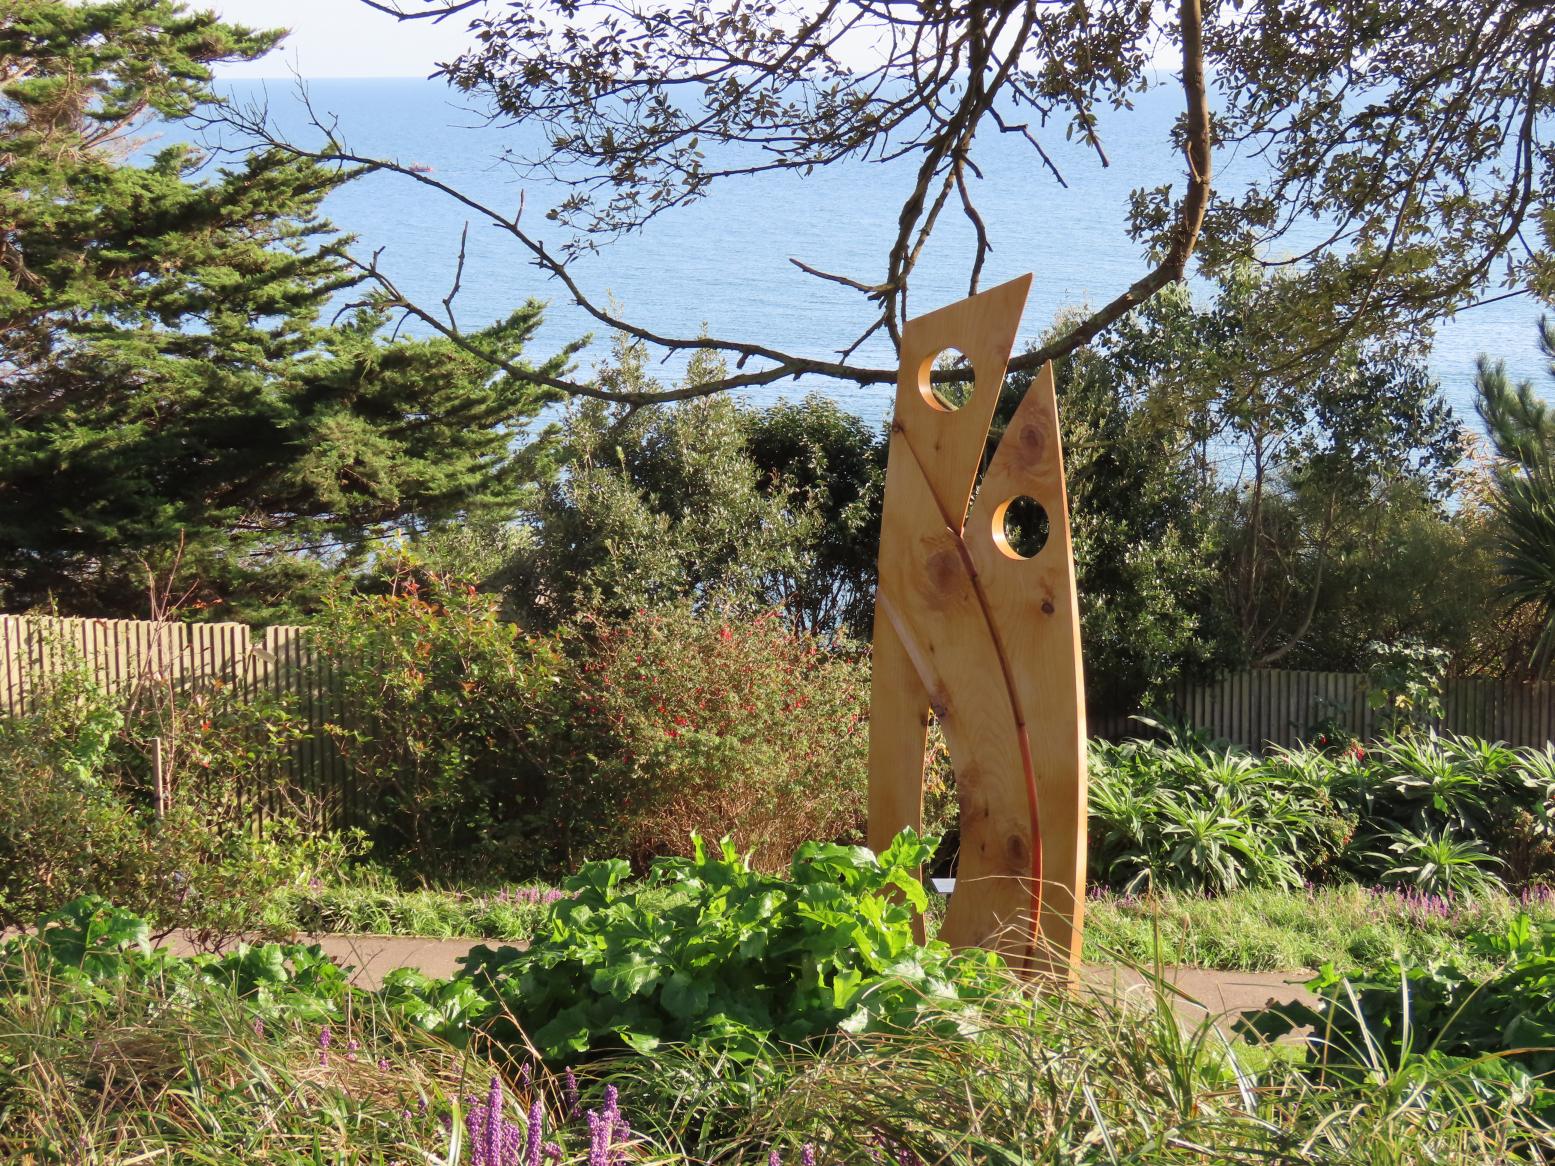 Chesil 6 by Kit Benwell, part of the Sculpture Trail in Langmoor Gardens, Lyme Regis